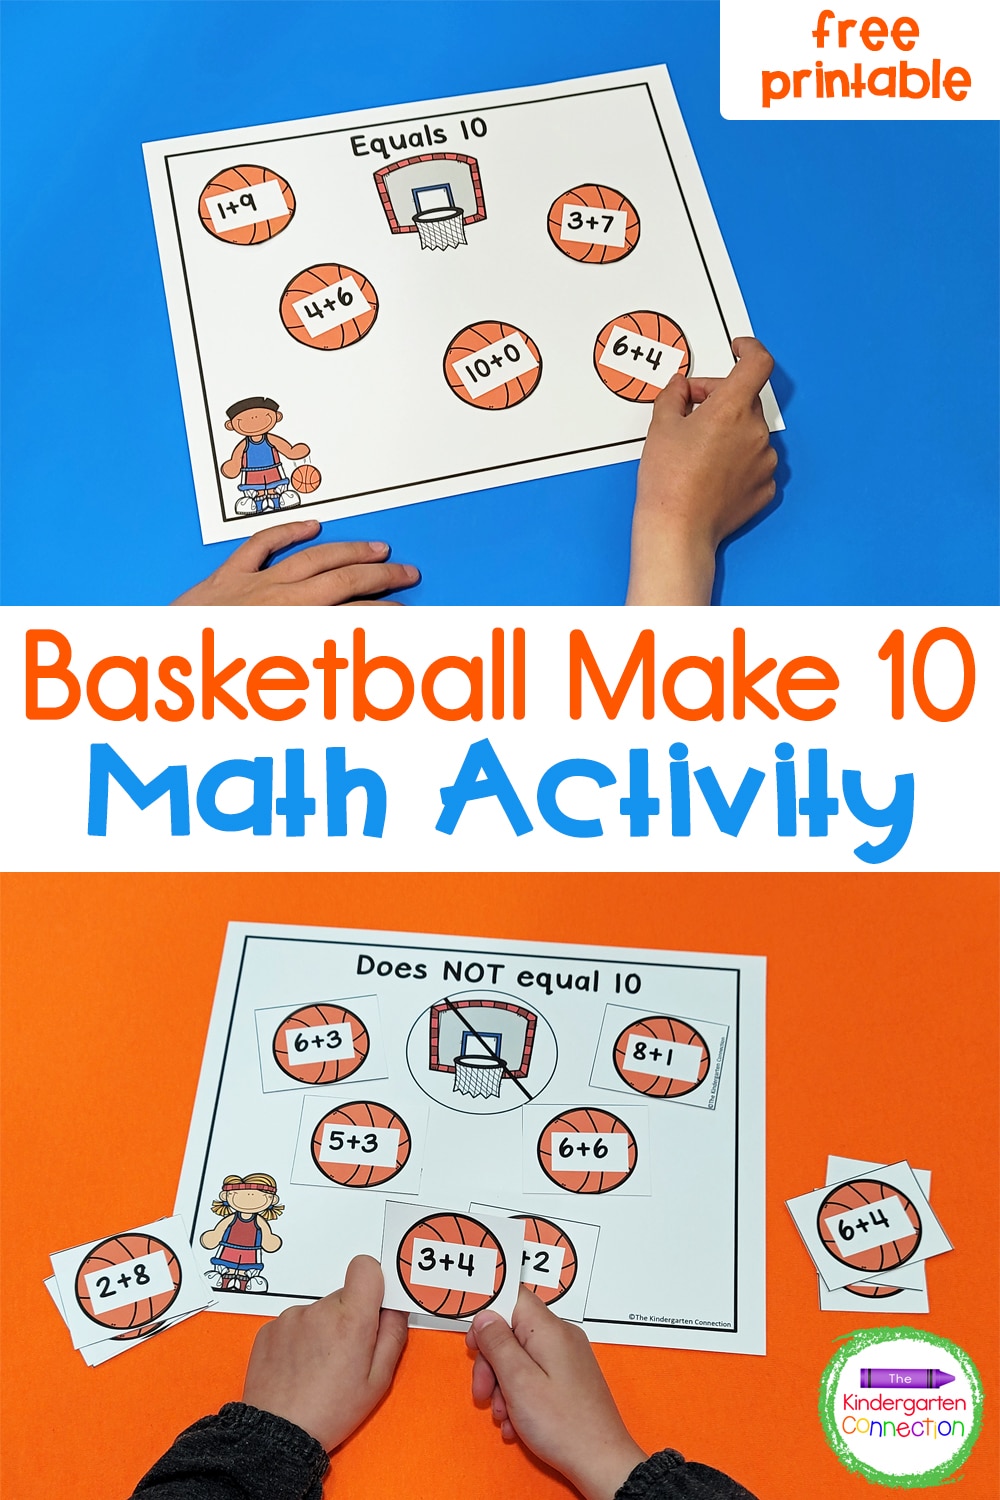 Work on sums of 10 with a fun, basketball theme! This free Basketball Make 10 Game is perfect for math centers and small groups!